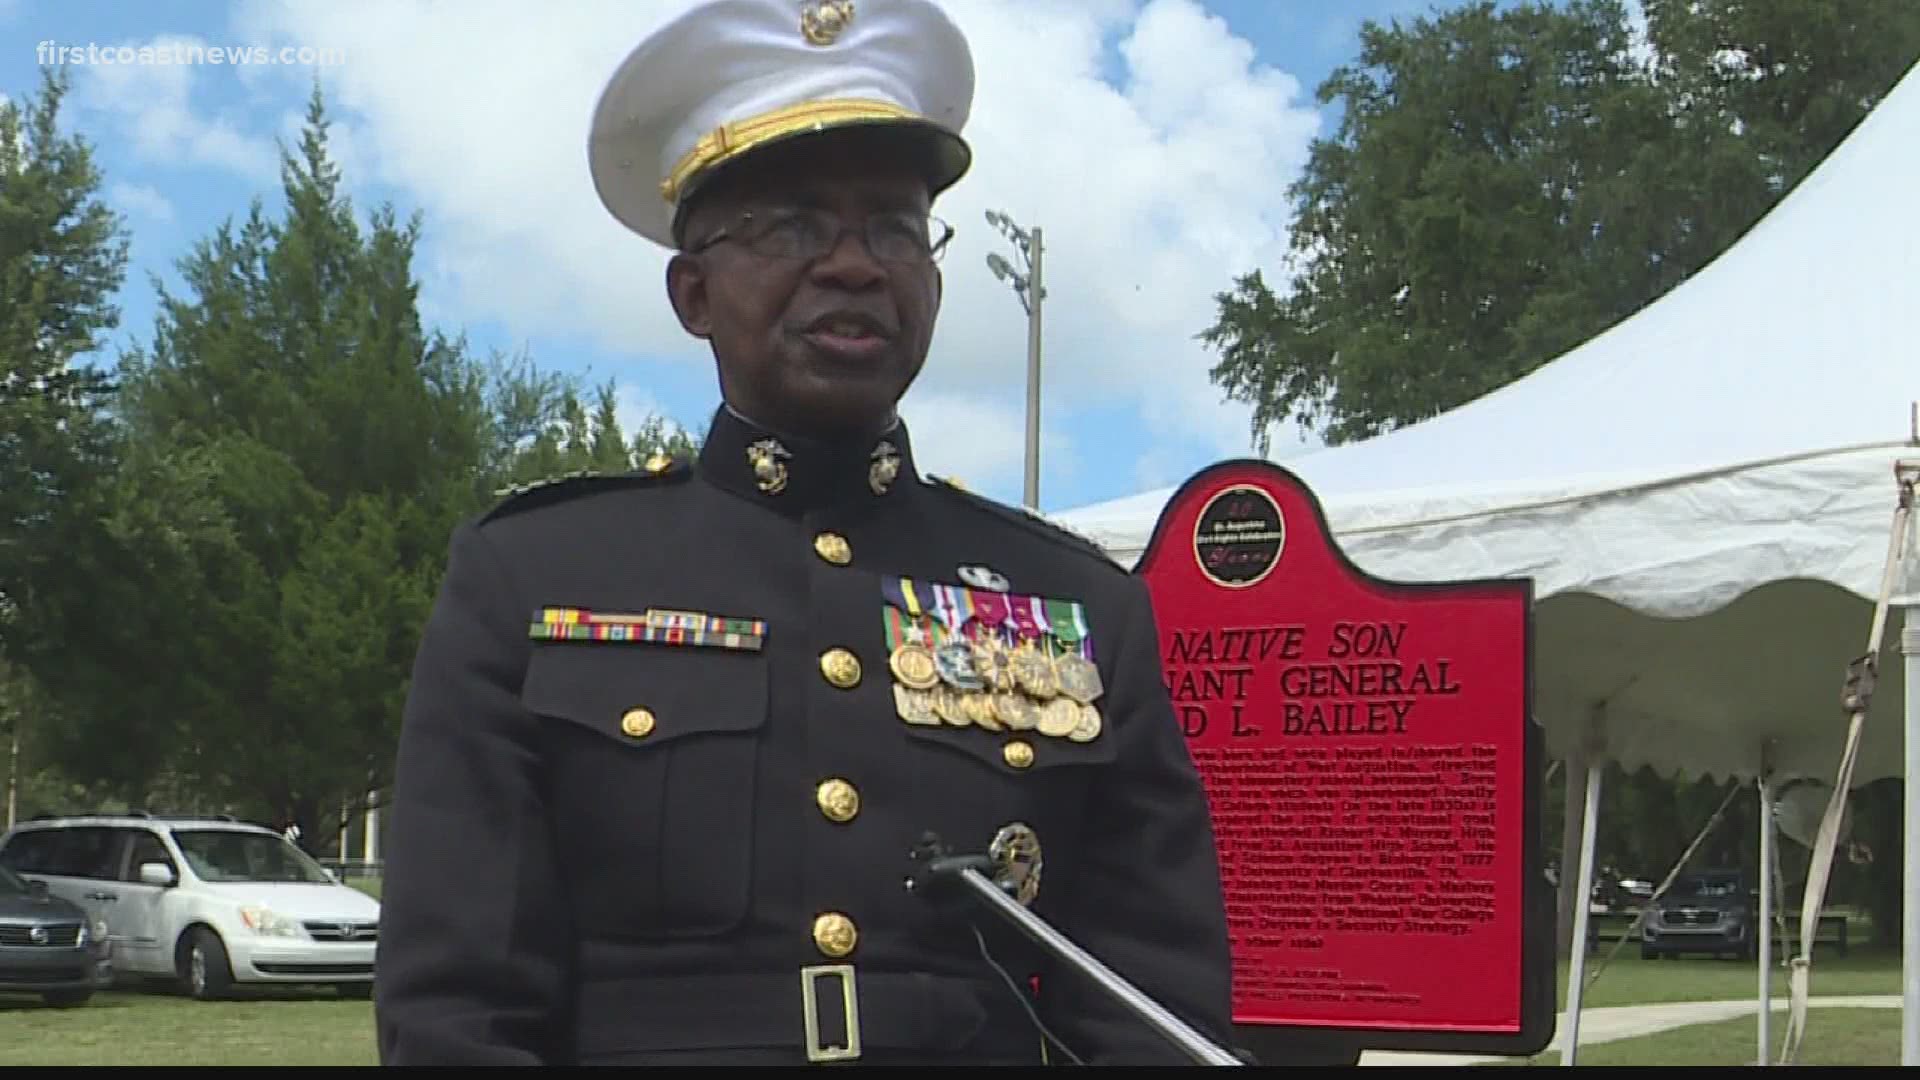 Lt. Gen. Ronald Bailey honored was honored in his hometown, saying of America overcoming challenges, “There’s no question in my mind that we won’t get there.”